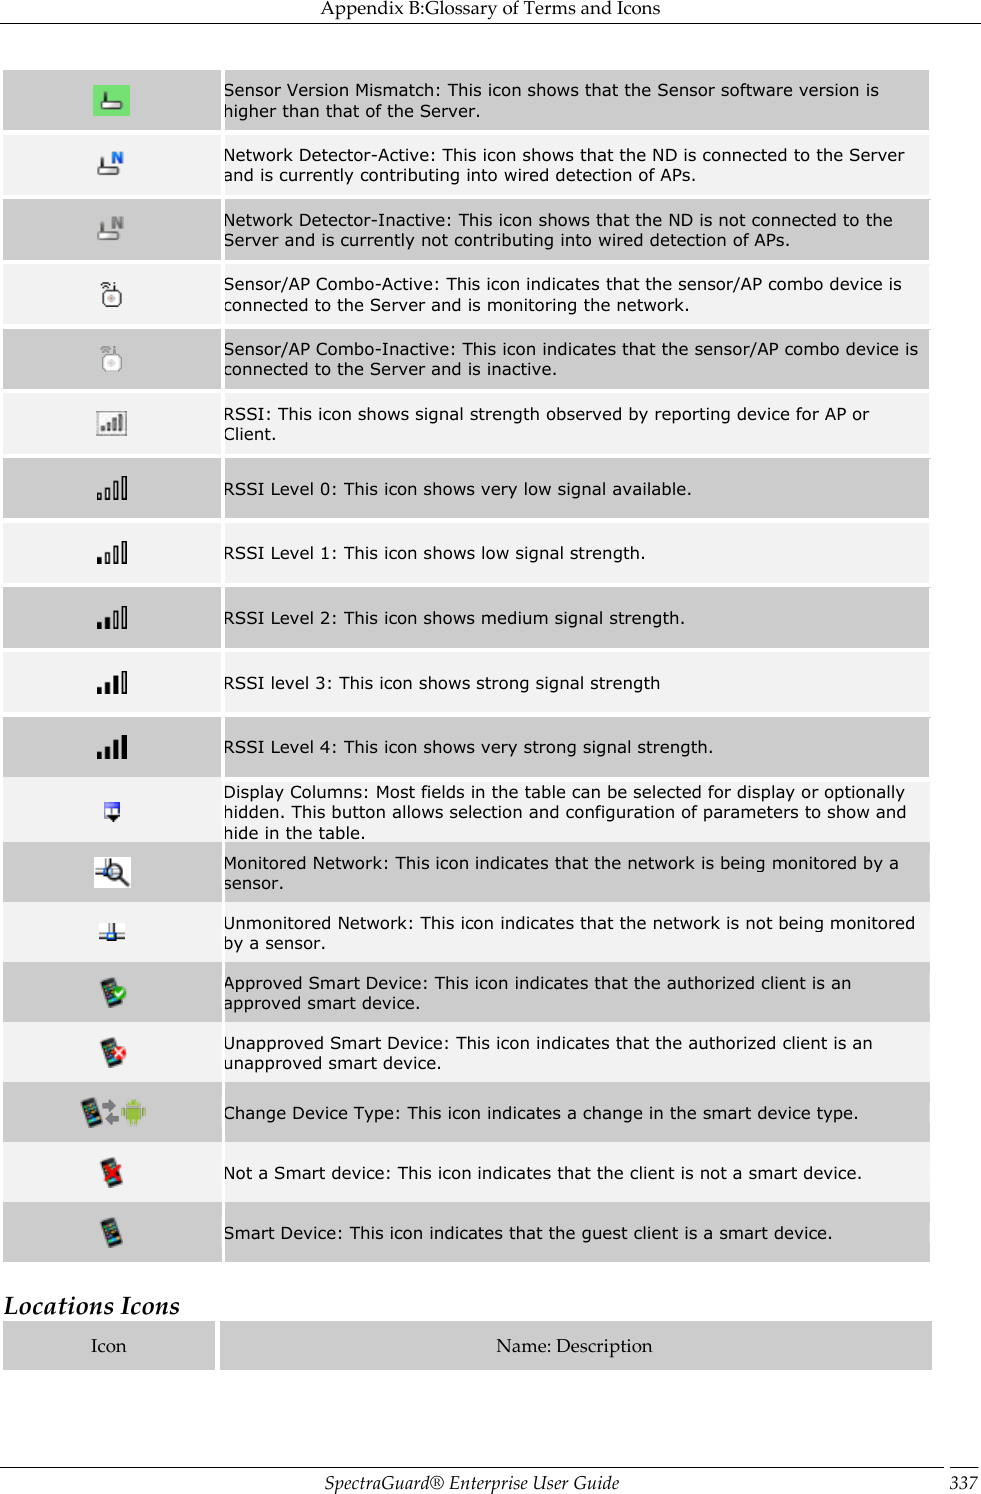 Appendix B:Glossary of Terms and Icons SpectraGuard®  Enterprise User Guide 337  Sensor Version Mismatch: This icon shows that the Sensor software version is higher than that of the Server.  Network Detector-Active: This icon shows that the ND is connected to the Server and is currently contributing into wired detection of APs.  Network Detector-Inactive: This icon shows that the ND is not connected to the Server and is currently not contributing into wired detection of APs.  Sensor/AP Combo-Active: This icon indicates that the sensor/AP combo device is connected to the Server and is monitoring the network.  Sensor/AP Combo-Inactive: This icon indicates that the sensor/AP combo device is connected to the Server and is inactive.  RSSI: This icon shows signal strength observed by reporting device for AP or Client.  RSSI Level 0: This icon shows very low signal available.  RSSI Level 1: This icon shows low signal strength.  RSSI Level 2: This icon shows medium signal strength.  RSSI level 3: This icon shows strong signal strength  RSSI Level 4: This icon shows very strong signal strength.  Display Columns: Most fields in the table can be selected for display or optionally hidden. This button allows selection and configuration of parameters to show and hide in the table.  Monitored Network: This icon indicates that the network is being monitored by a sensor.  Unmonitored Network: This icon indicates that the network is not being monitored by a sensor.  Approved Smart Device: This icon indicates that the authorized client is an approved smart device.  Unapproved Smart Device: This icon indicates that the authorized client is an unapproved smart device.  Change Device Type: This icon indicates a change in the smart device type.  Not a Smart device: This icon indicates that the client is not a smart device.  Smart Device: This icon indicates that the guest client is a smart device.   Locations Icons Icon Name: Description 